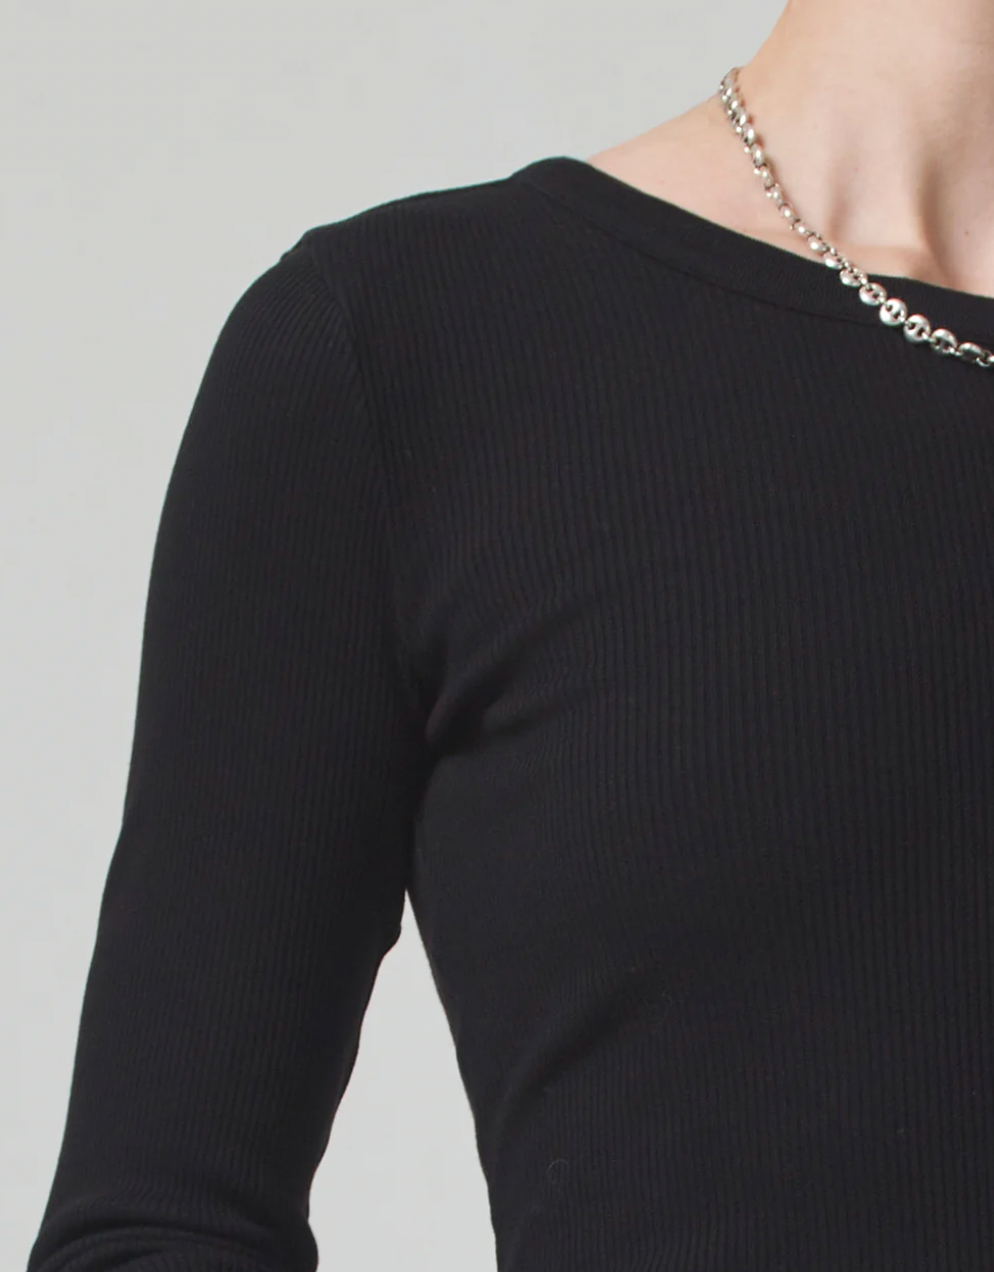 Product Image for Adeline Top, Black